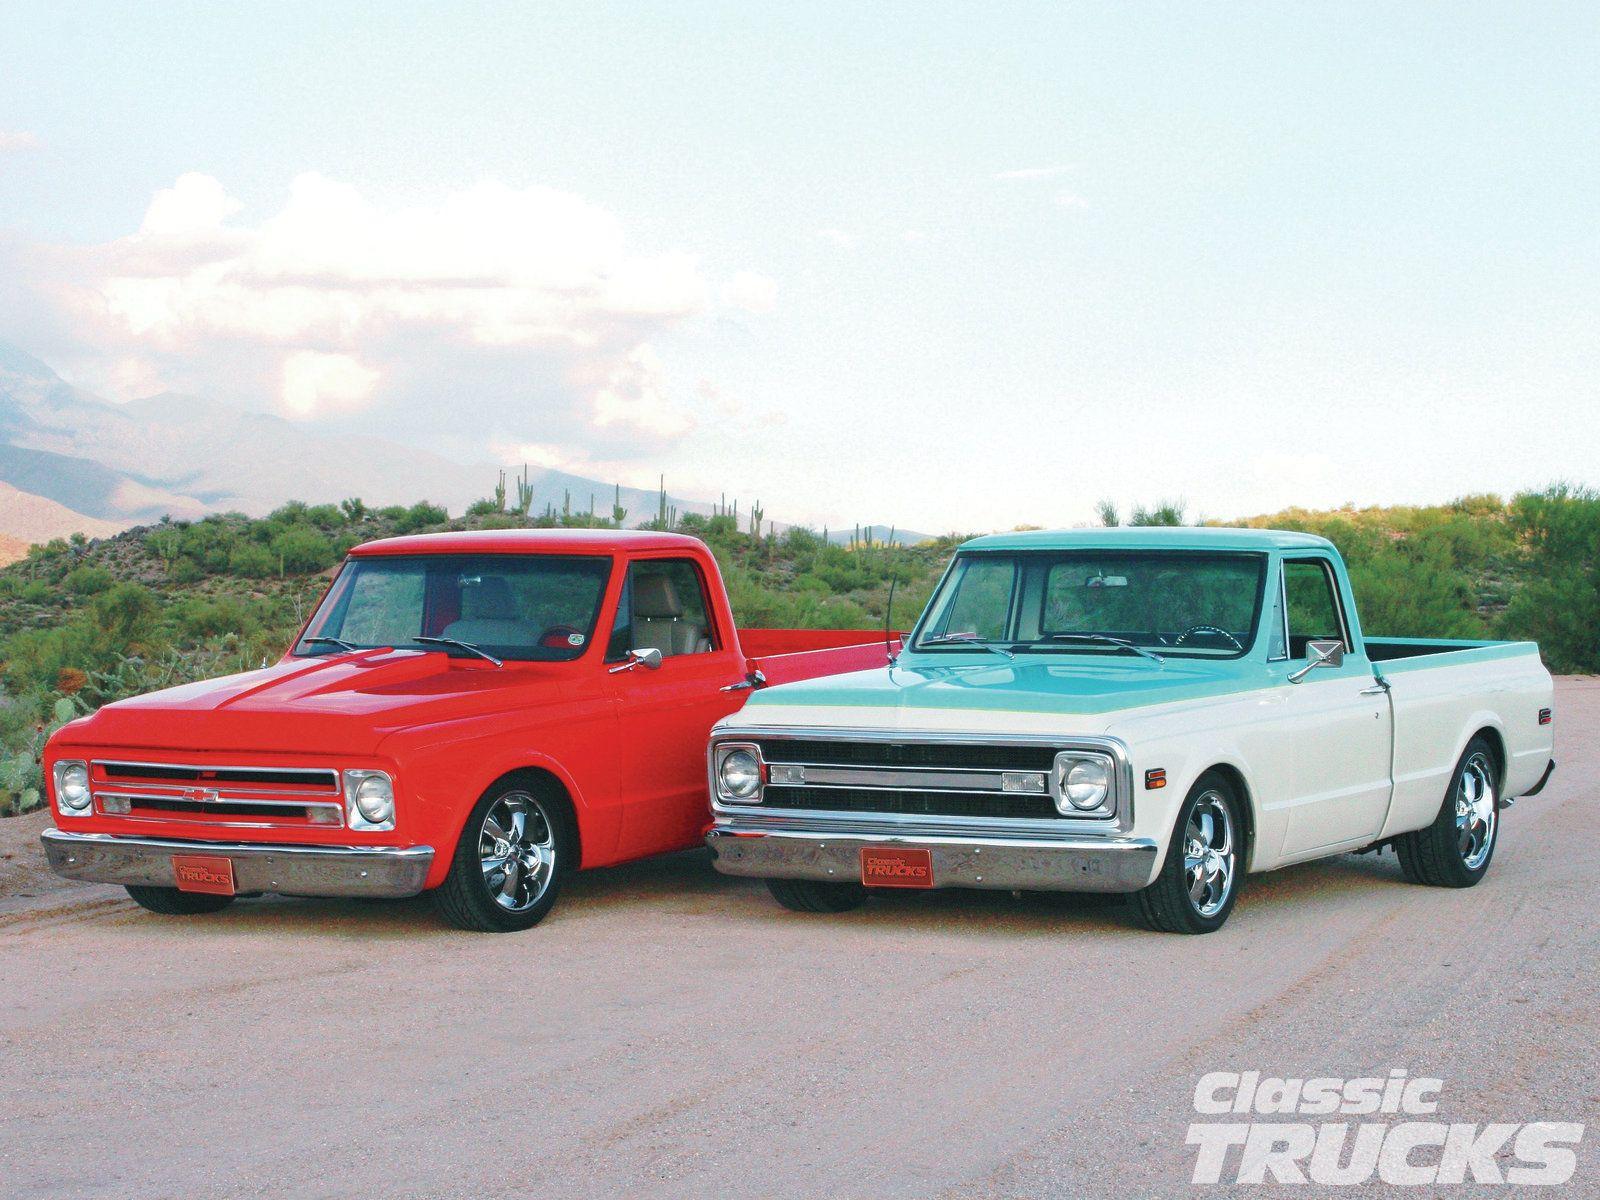 Chevy C10, White, And Blue Rod Network